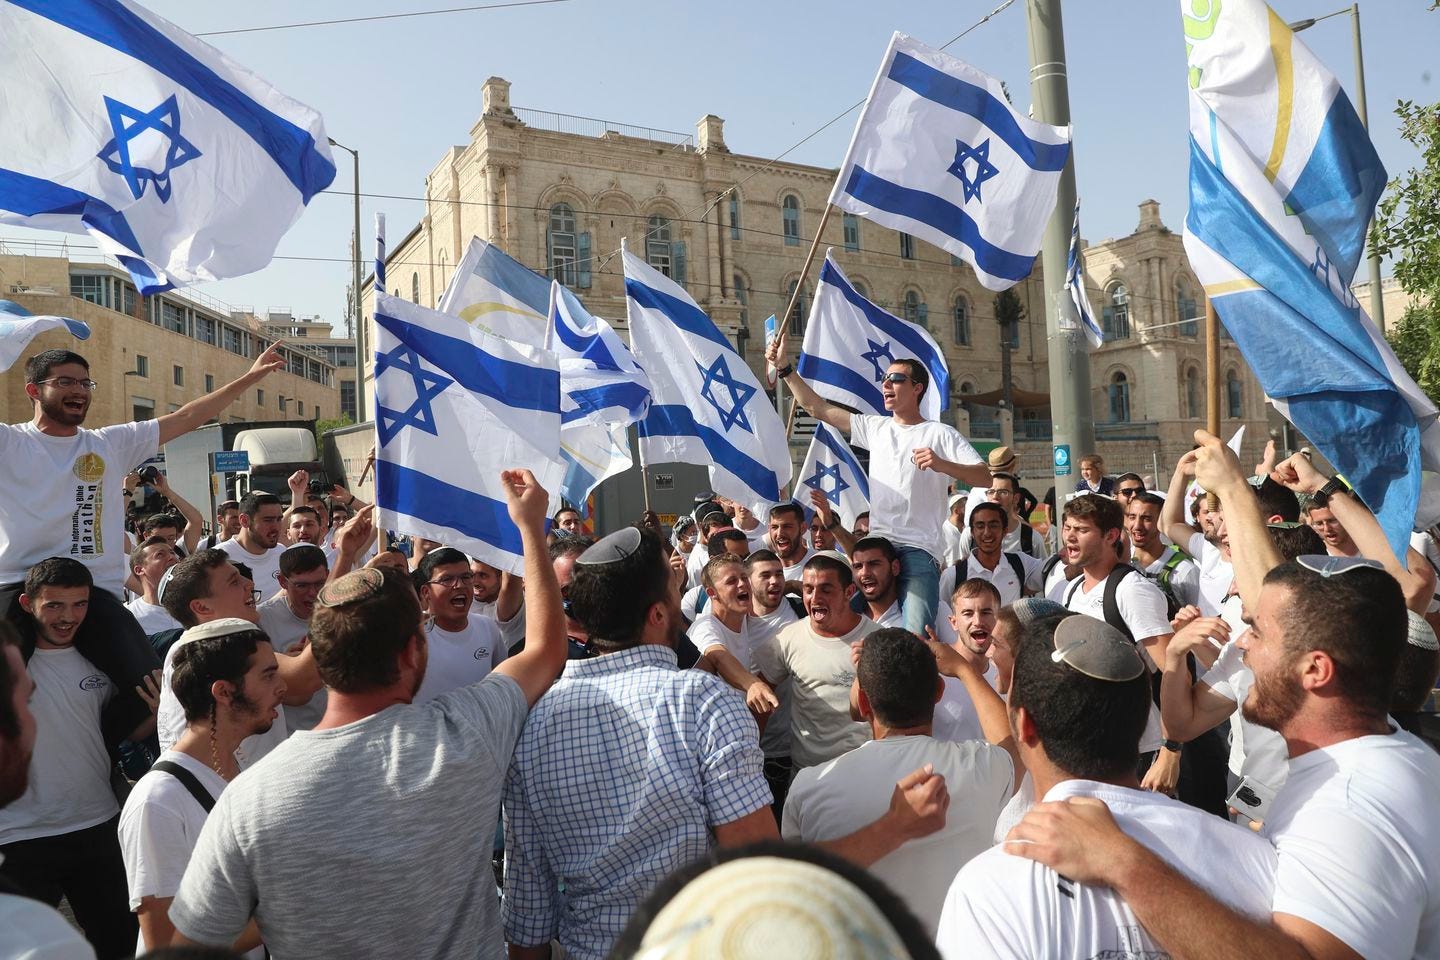 In this May 10, 2021, file photo, Israelis waved national flags during a Jerusalem Day parade, in Jerusalem. Israel’s new government on Monday approved a contentious parade by Israeli nationalists through Palestinian areas around Jerusalem's Old City, setting the stage for possible renewed confrontations just weeks after an 11-day war with Hamas militants in the Gaza Strip.